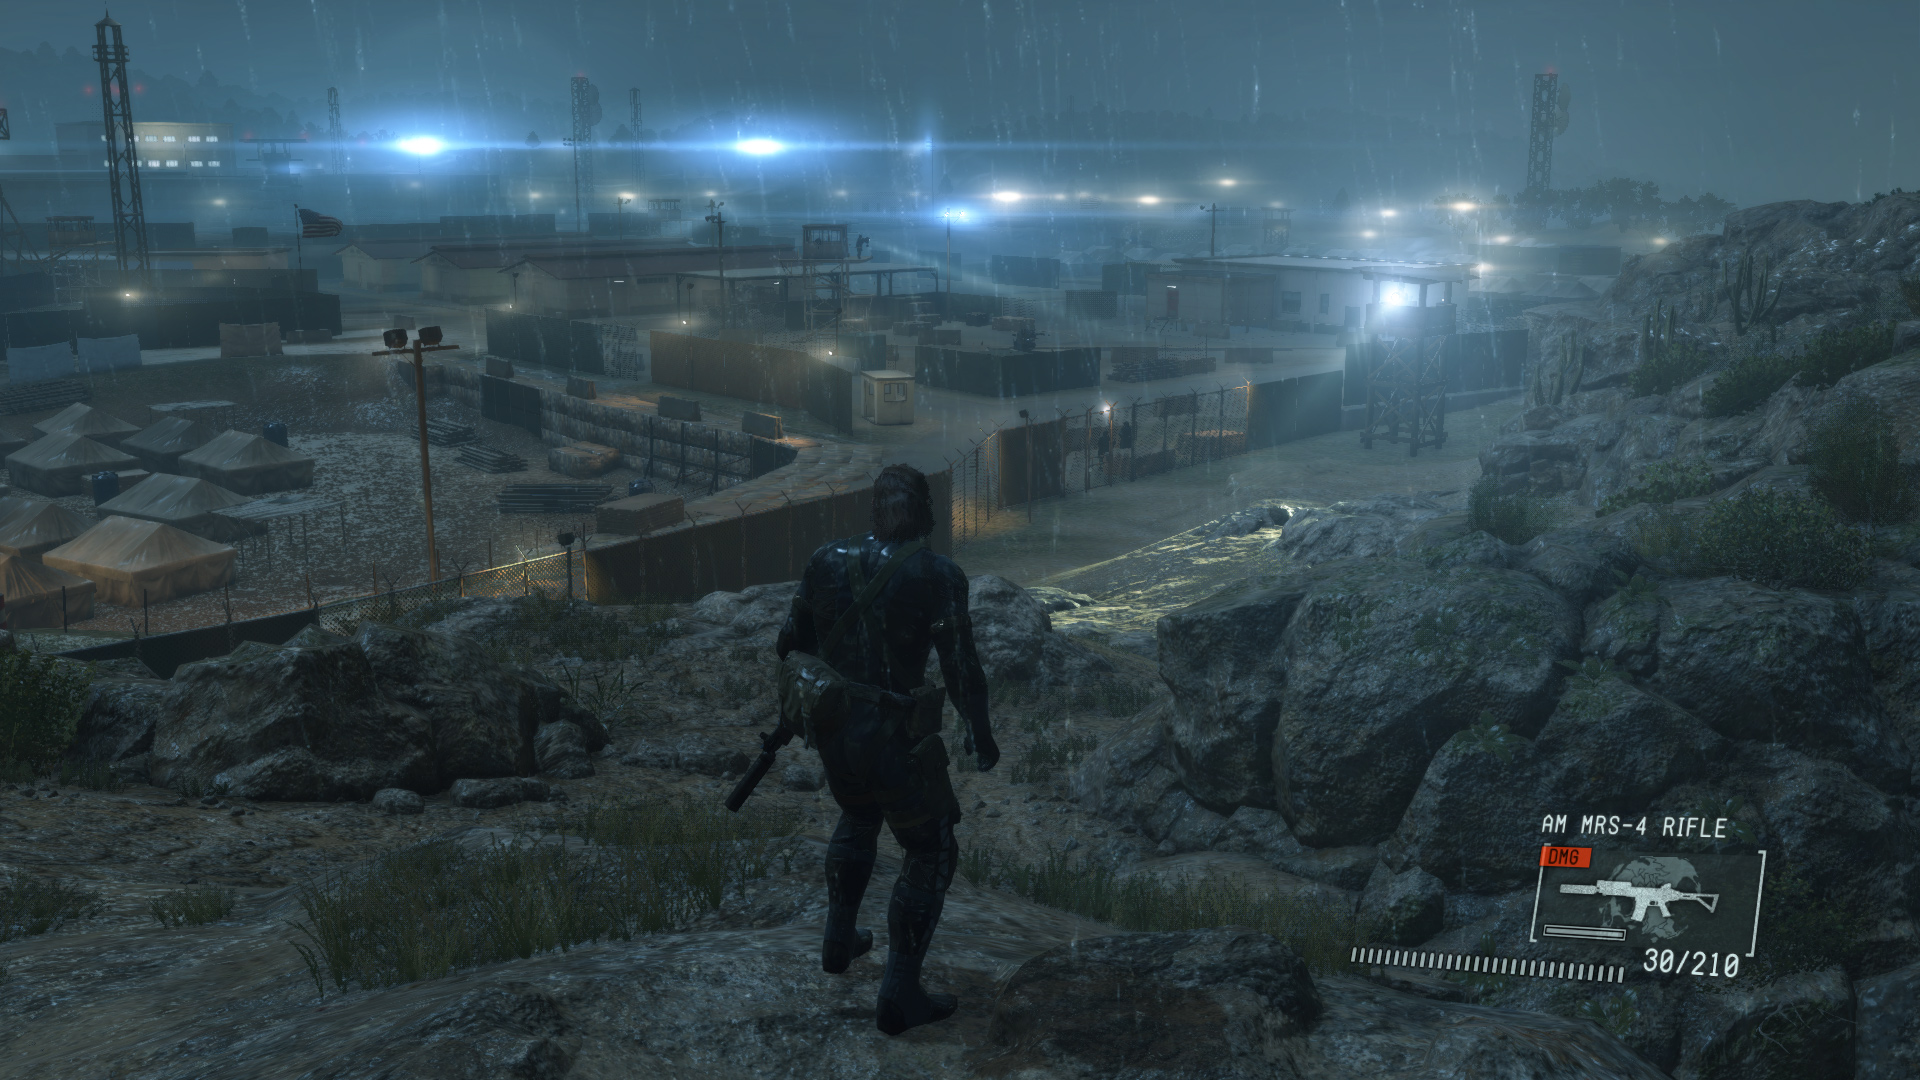 Media asset in full size related to 3dfxzone.it news item entitled as follows: Requisiti hardware e screenshots di Gear Solid V: Ground Zeroes per PC | Image Name: news21890_metal-gear-solid-v-ground-zeroes-ps4-screenshot_1.jpg